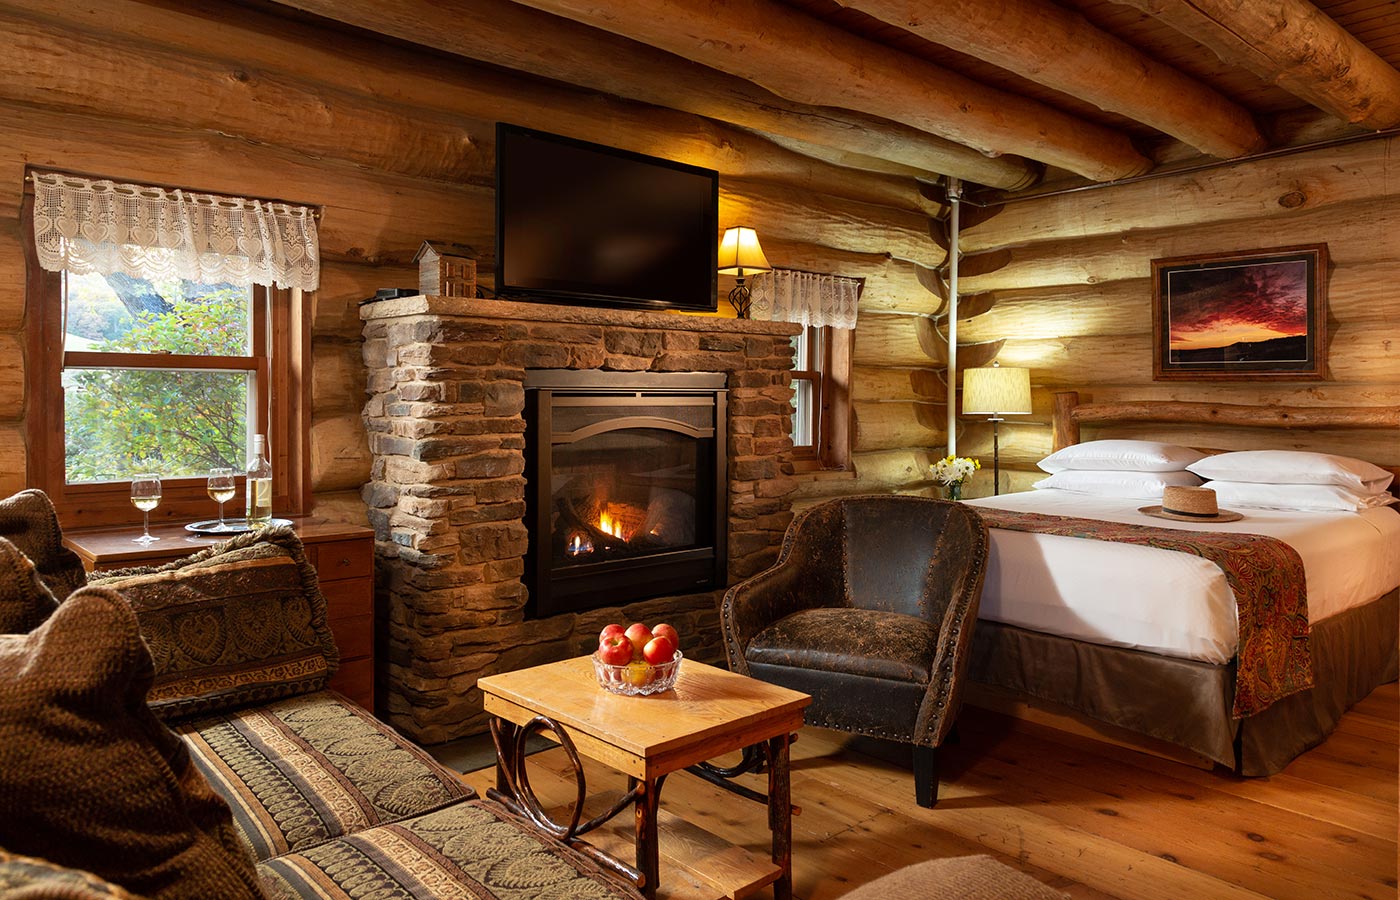 Our Paul Bunyan log cabin is the biggest and most popular of our three cabins in Wisconsin.